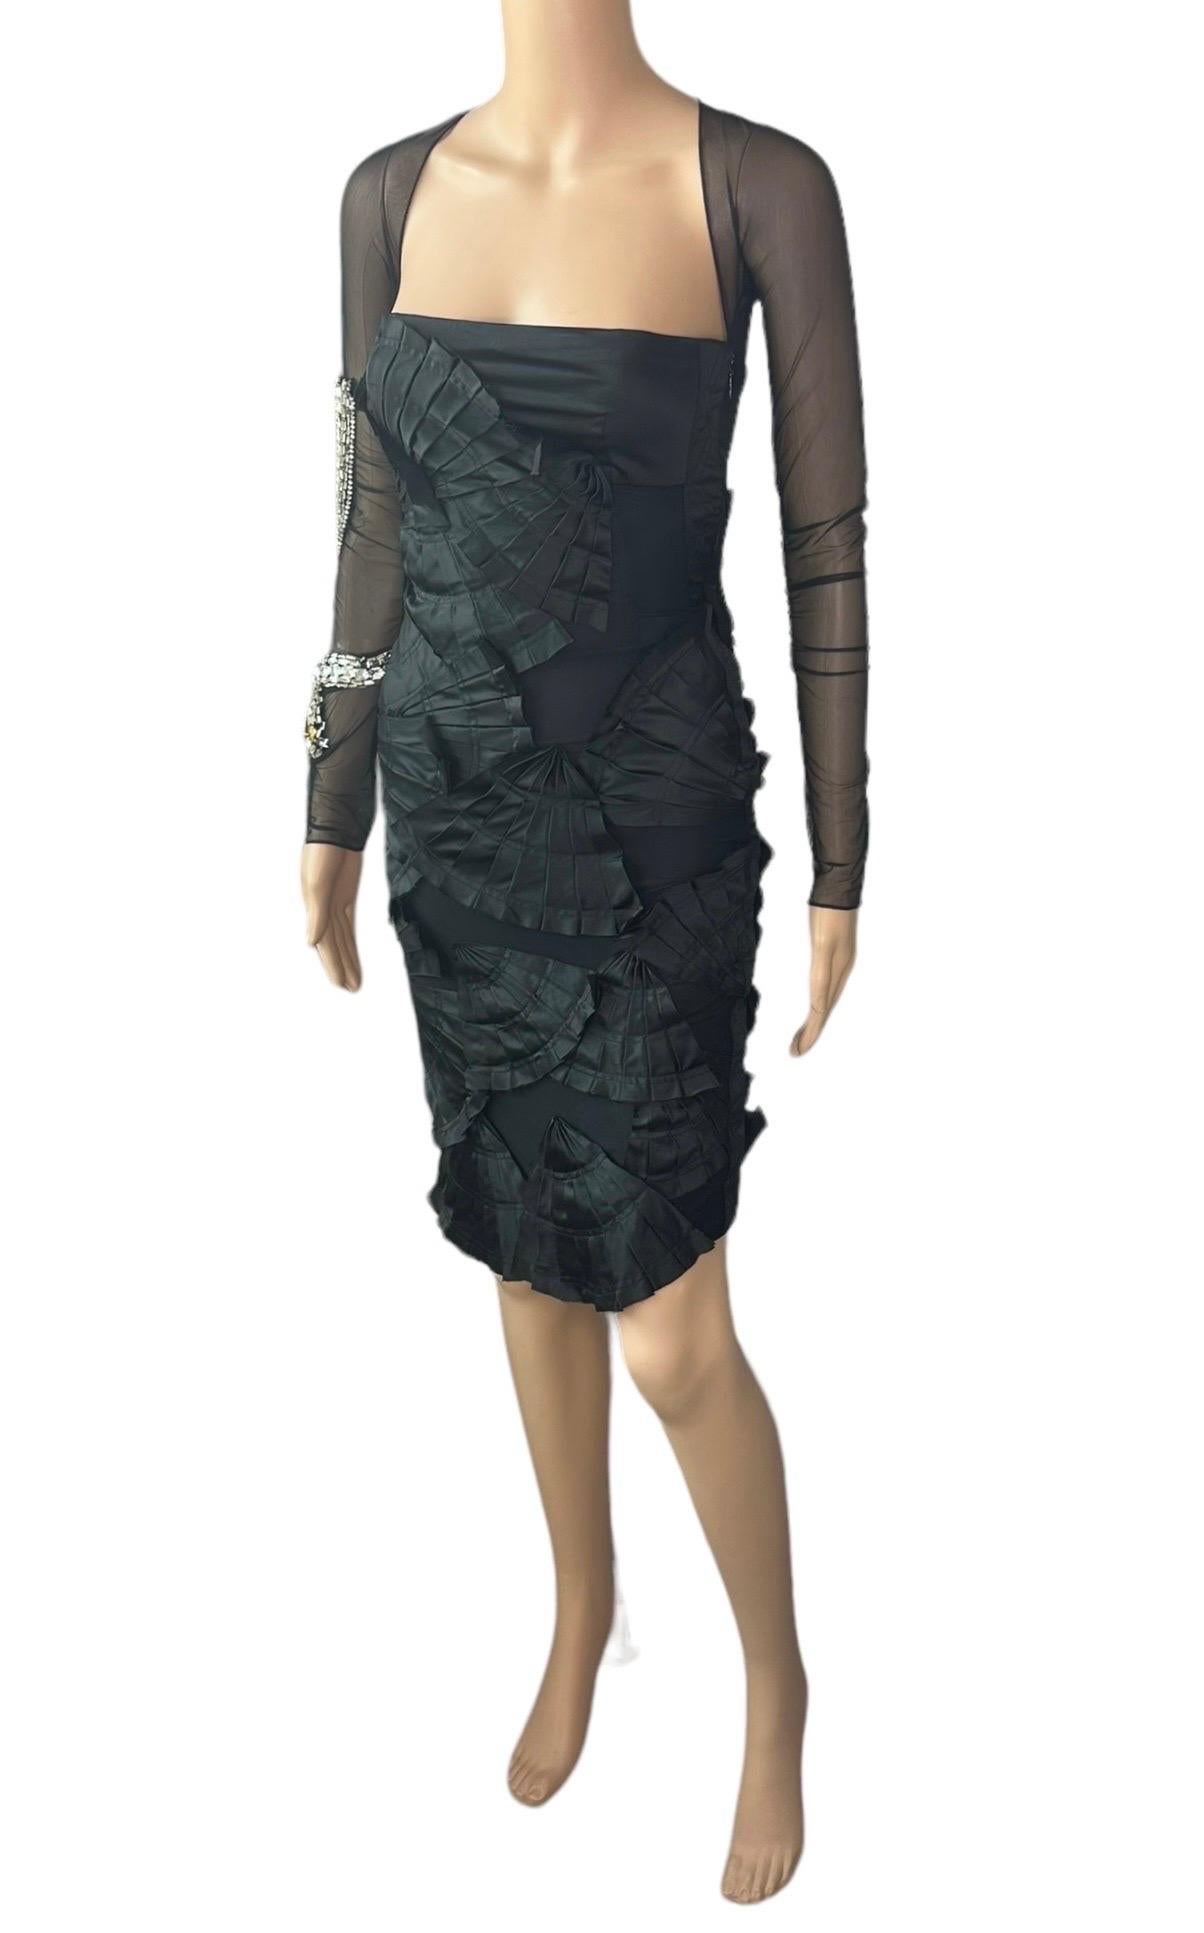 Tom Ford for Gucci S/S 2004 Runway Embellished Snake Sheer Cutout Black Dress For Sale 5